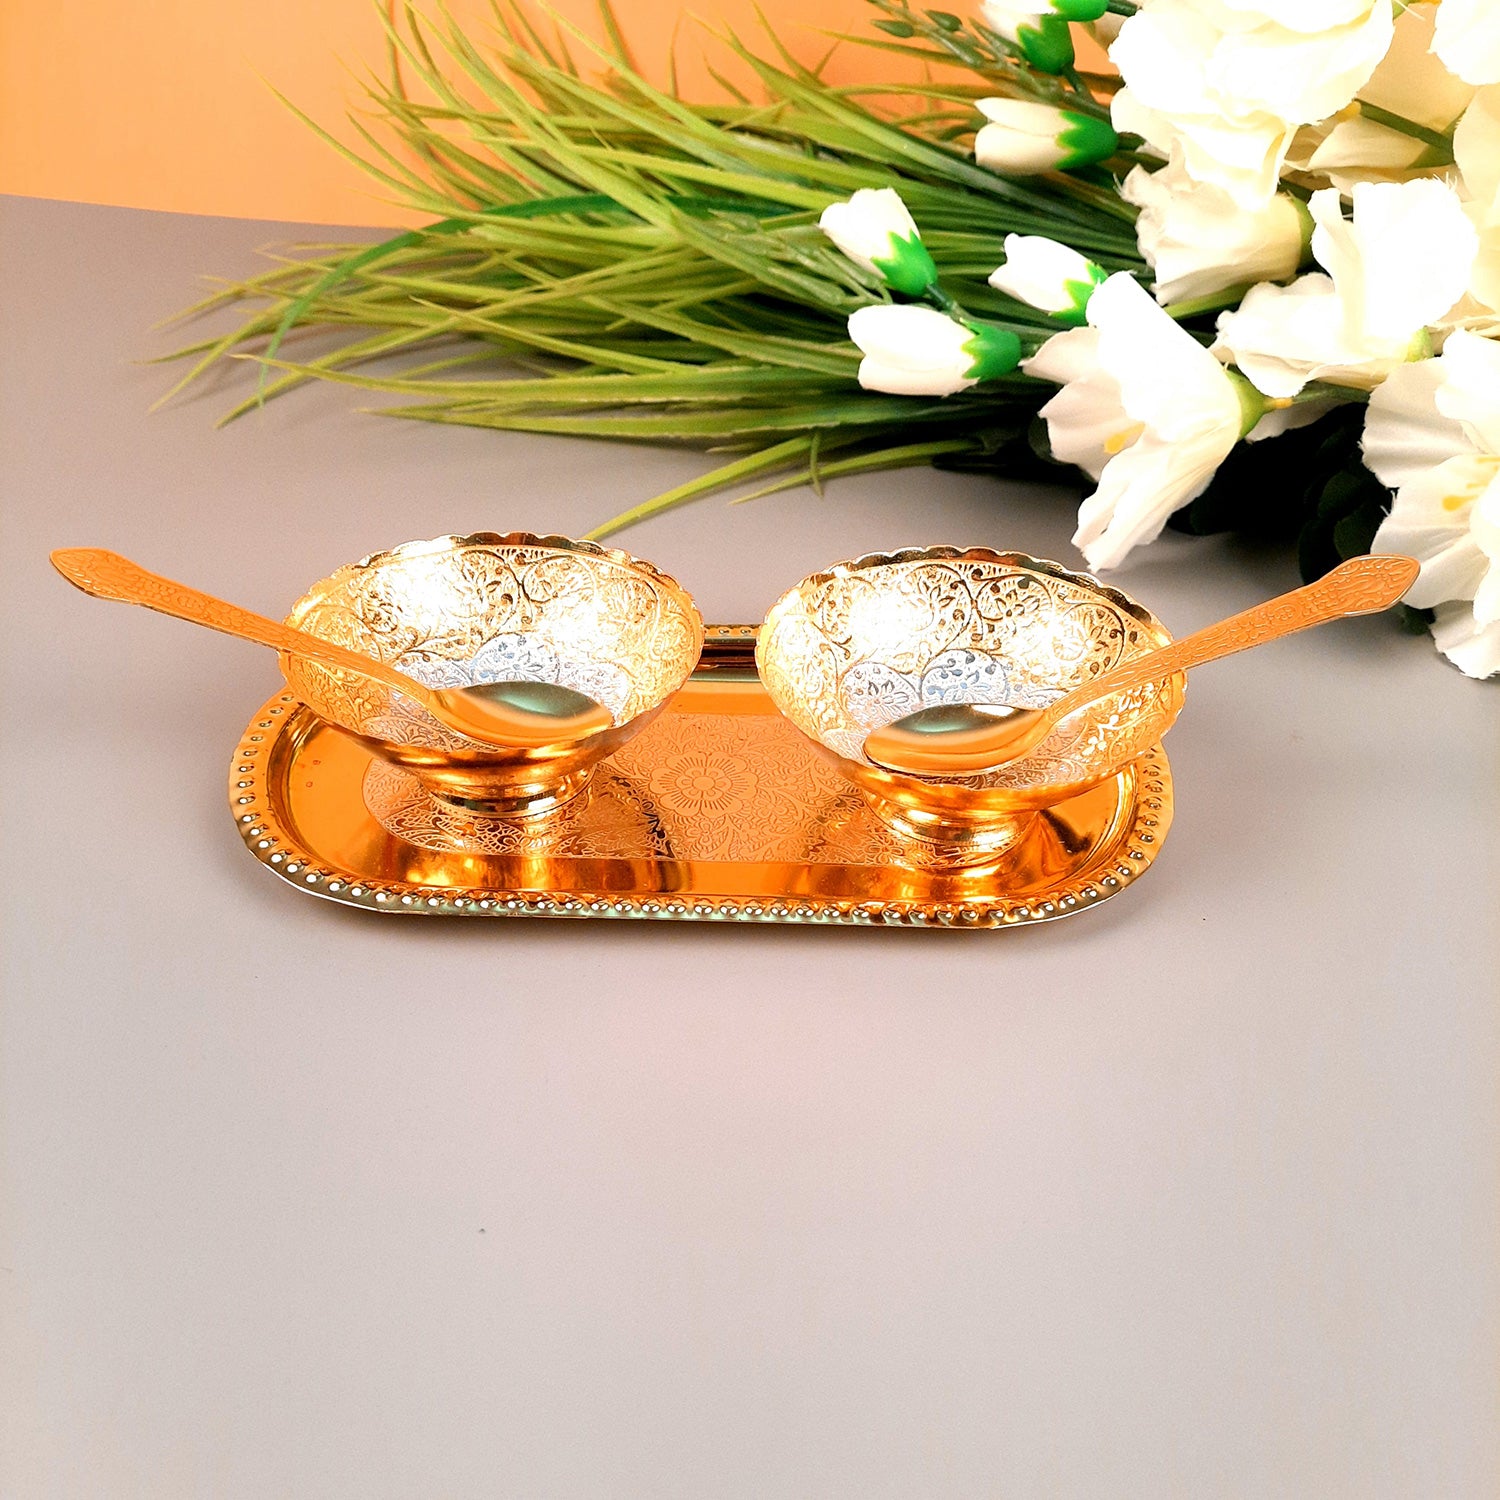 Dessert Bowls With Tray, Spoon & Gift Box | Dry Fruit / Mukhwas Serving Tray With Bowl - For Dining Table, Home & Kitchen Decor | Wedding, Housewarming & Diwal Gift Set - Apkamart